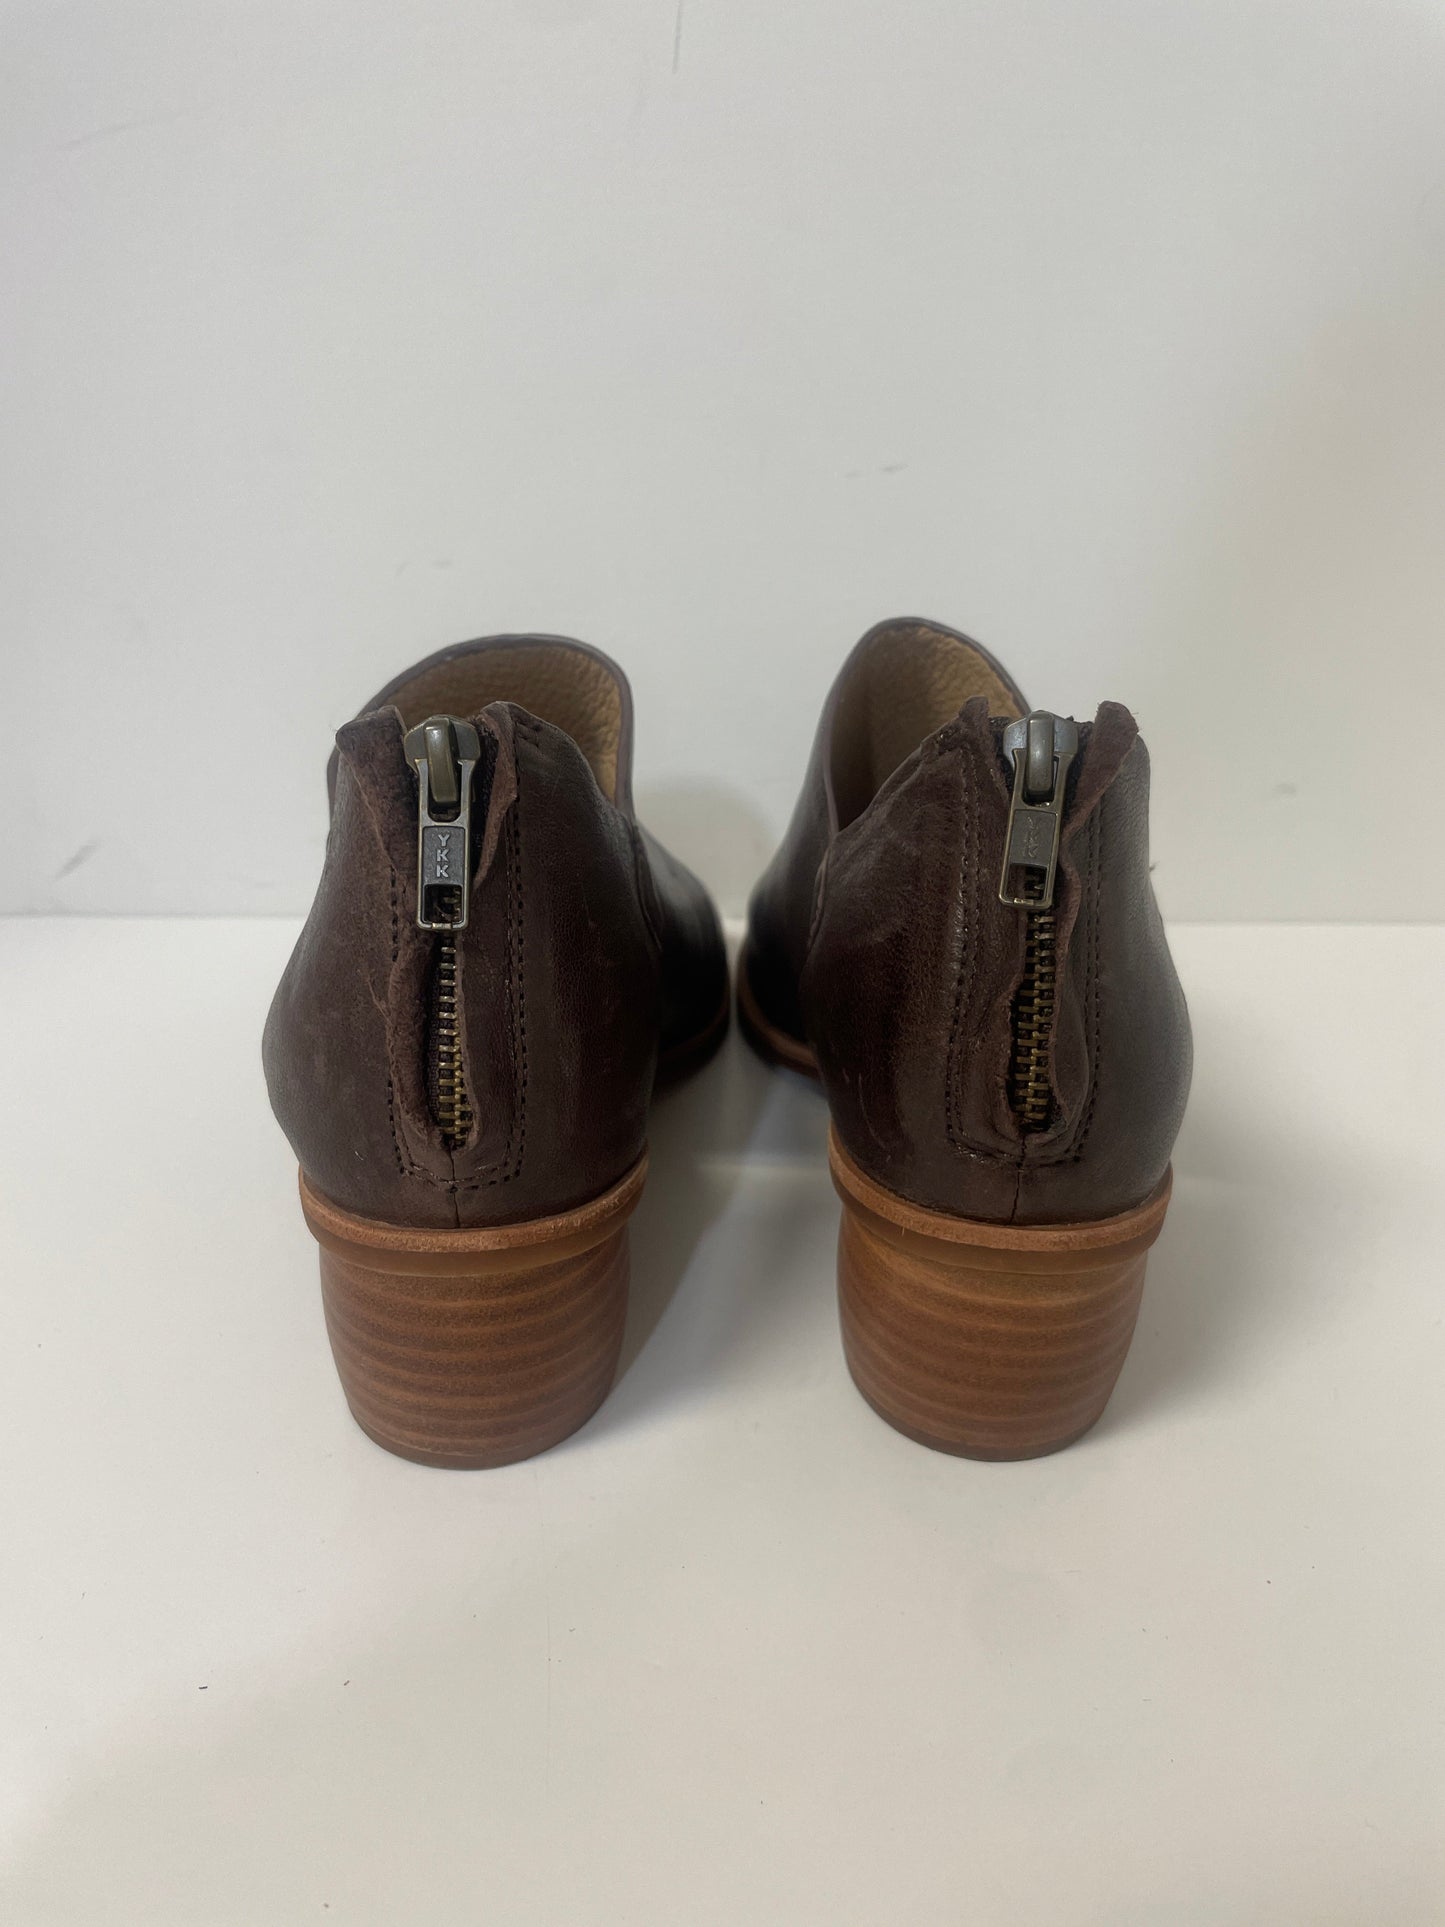 Brown Shoes Heels Block Sofft, Size 8